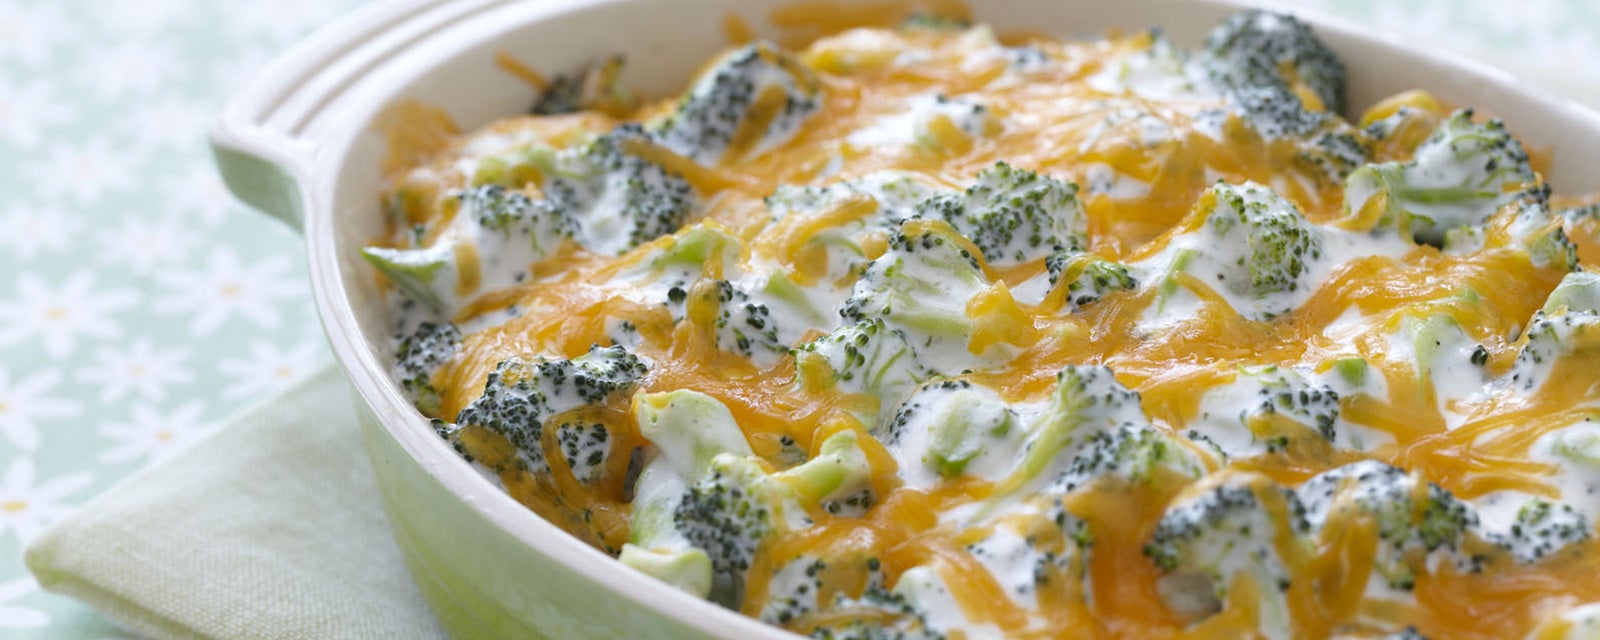 HVR_Creamy_Broccoli-_and_Cheese_AF.jpg